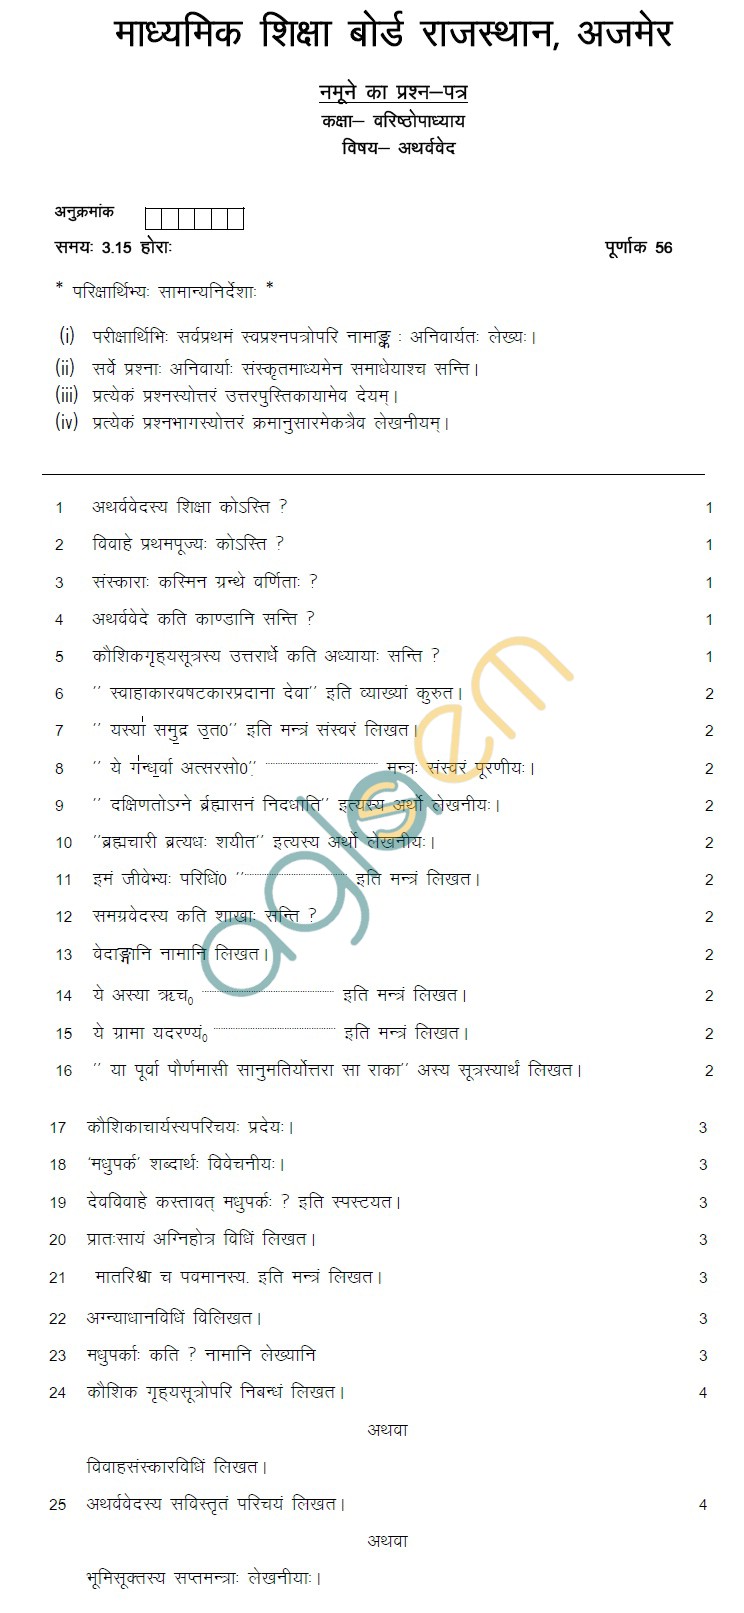 Rajasthan Board Class 12 Atharvveda Model Question Paper